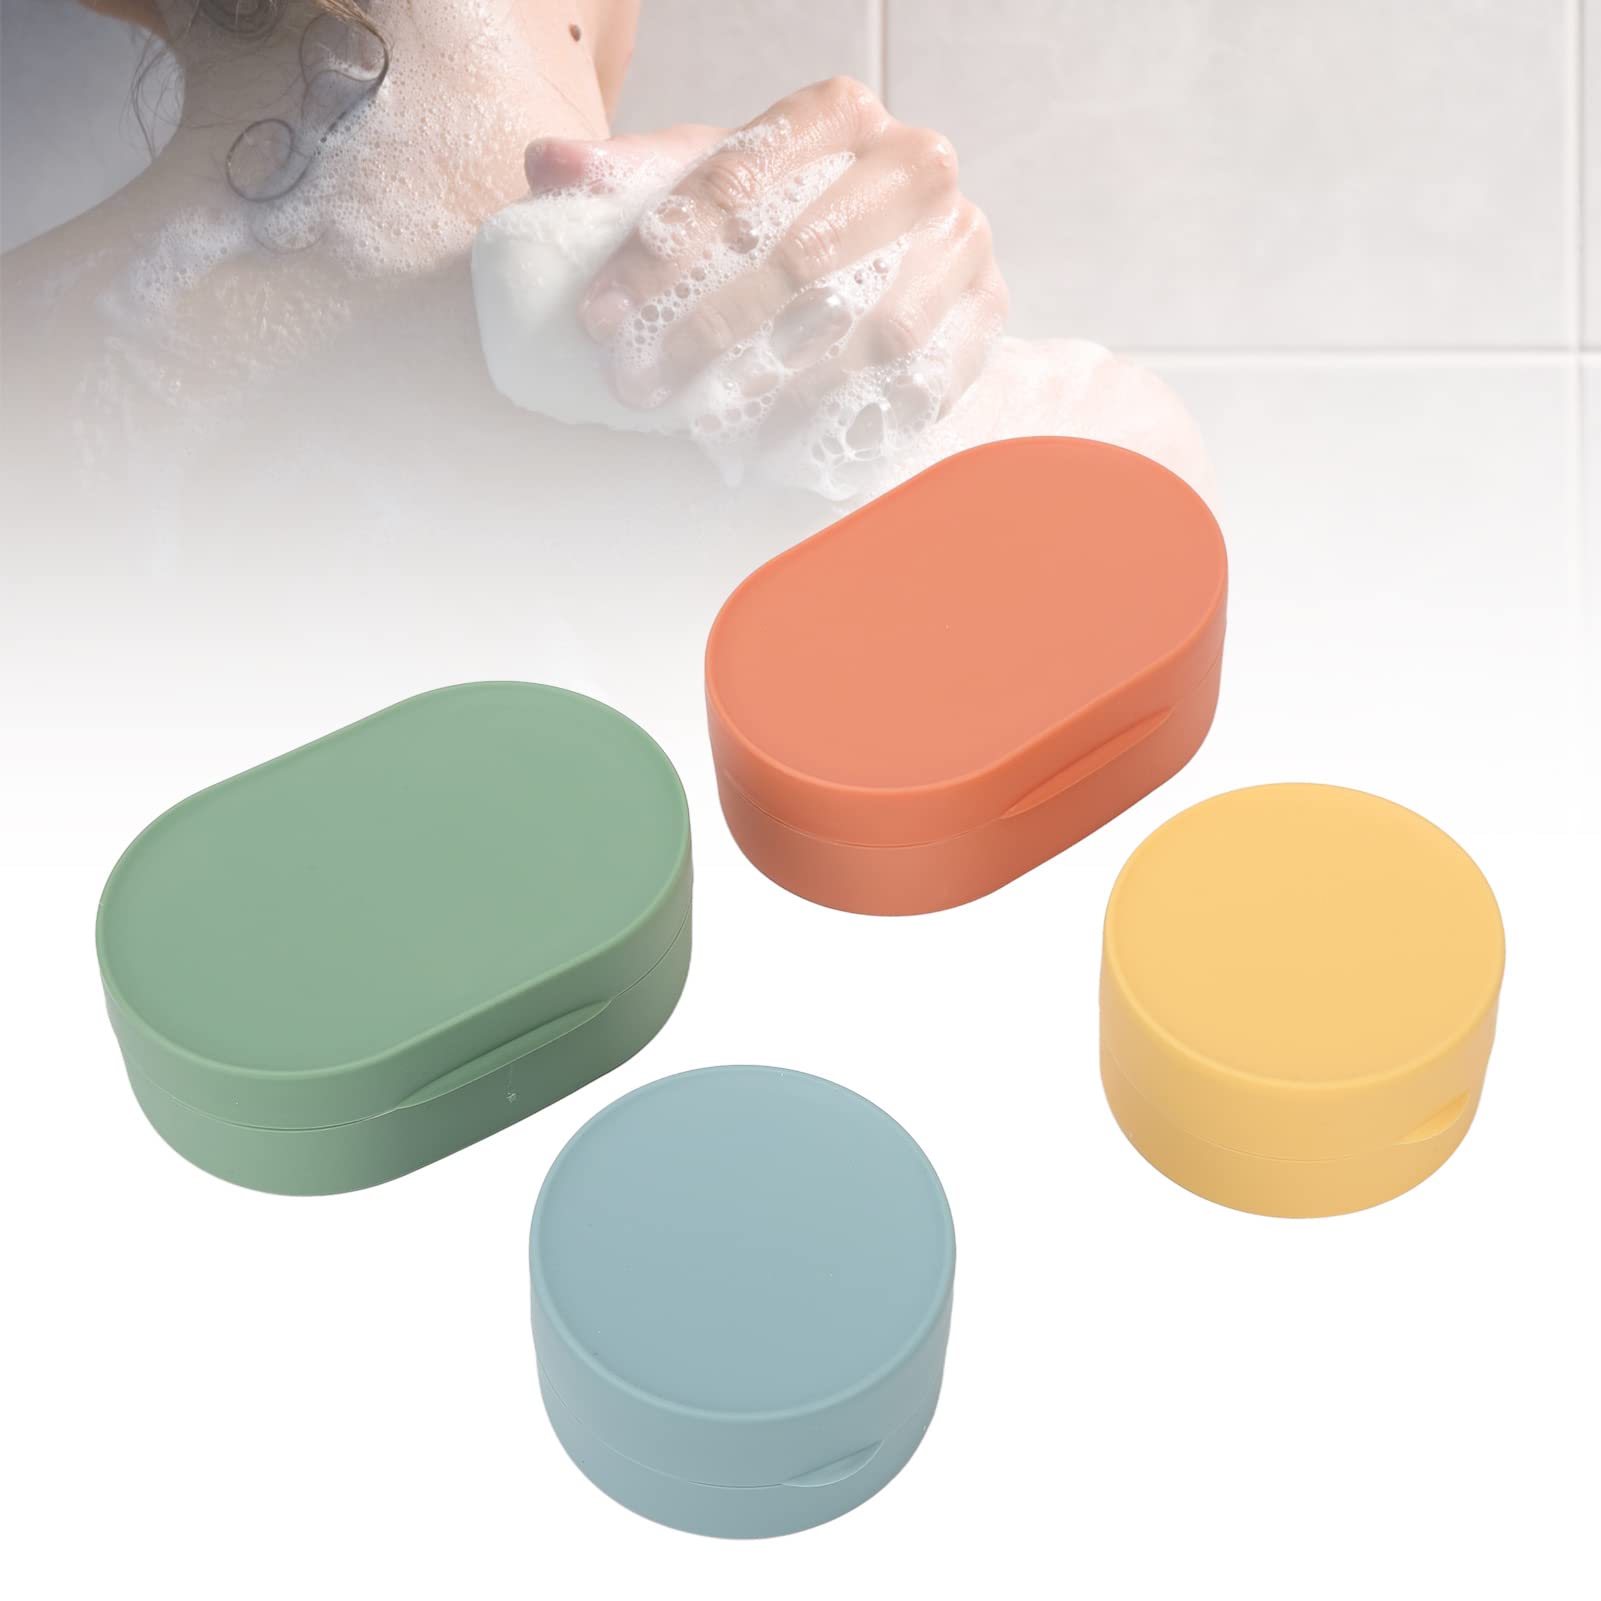 4pcs Soap Cases, Portable Round Oval Soap Holders, Travel Plastic Soap Case, Portable Soap Box Tray, Toilet Soap Containers Storage Boxes with Foaming Nets for Home, Bath, Hiking, Traveling